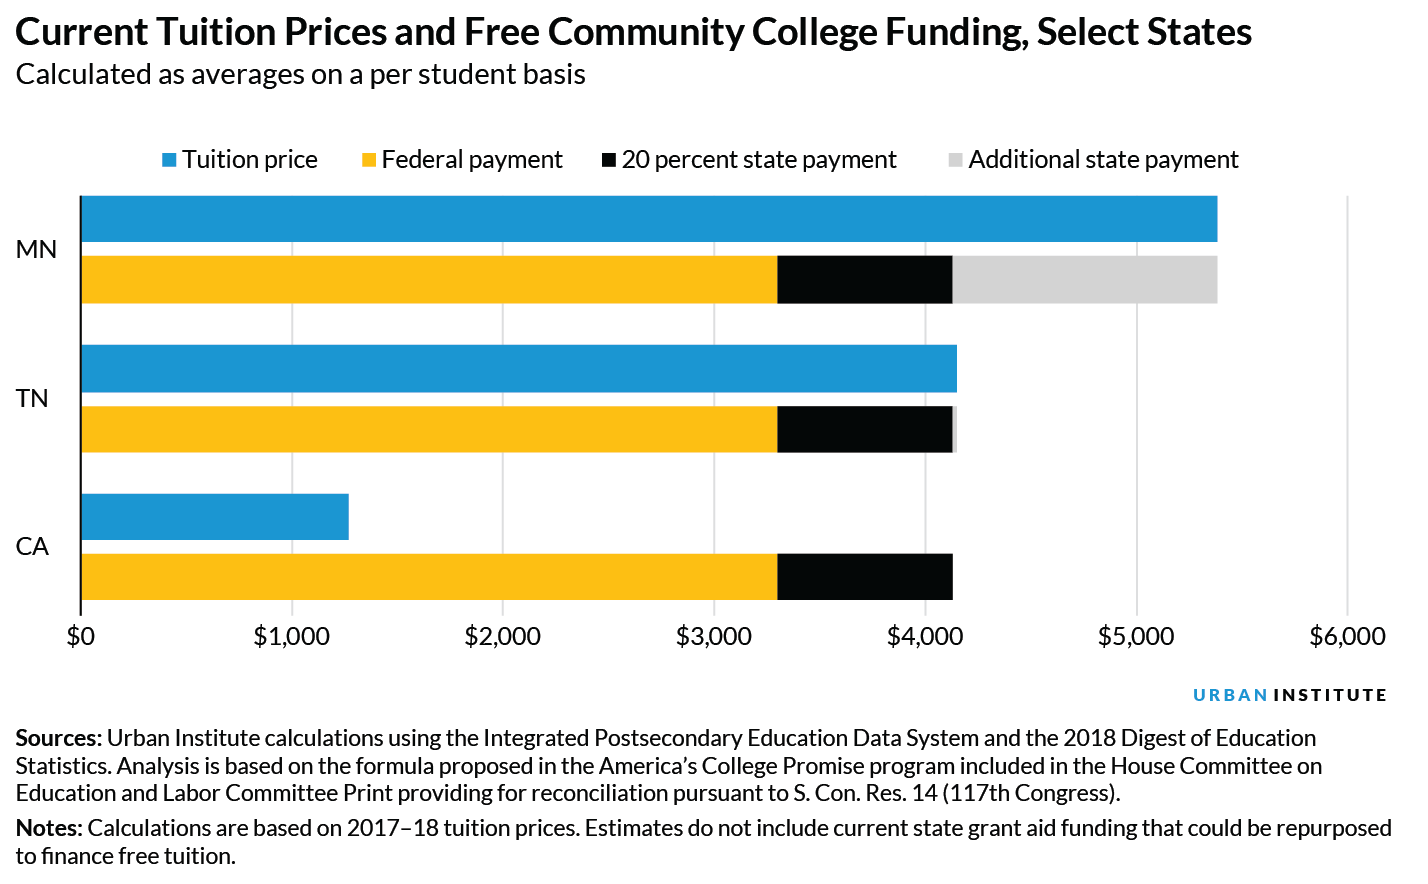 A horizontal bar chart comparing current tuition prices and what proposed free community college funding would provide on a per-student basis in California, Tennessee, and Minnesota. 